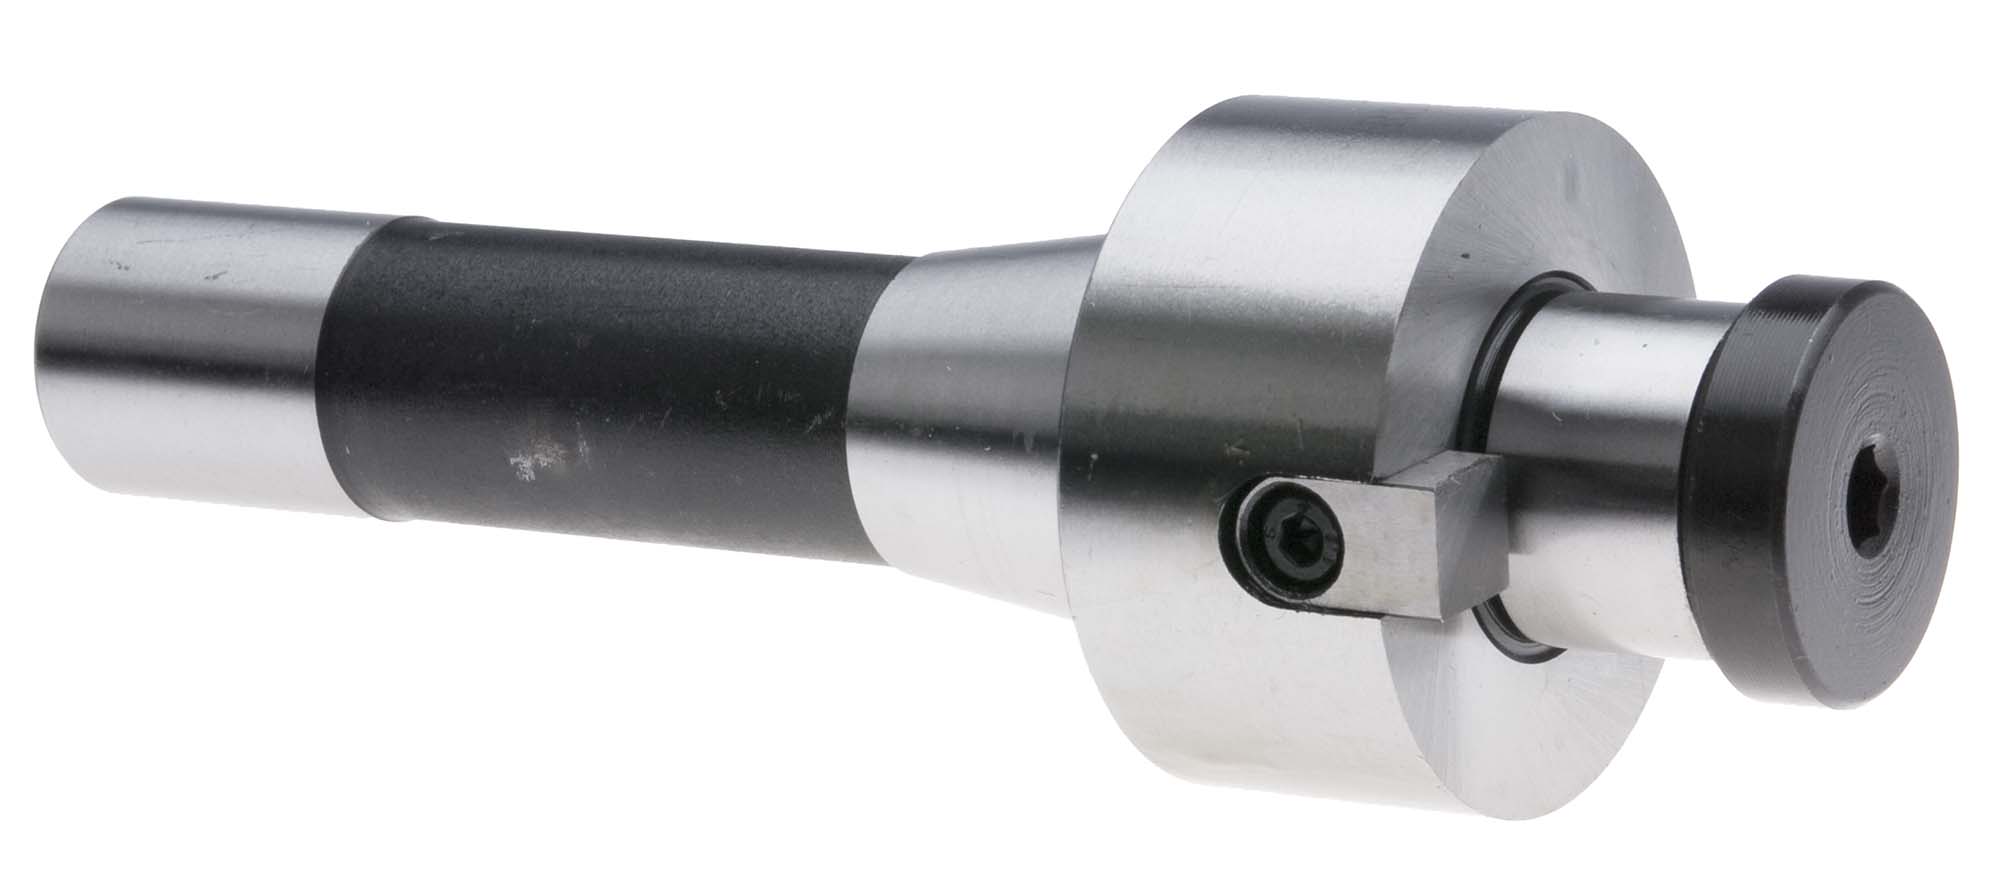 1 1/4" R8 Shell End Mill Arbor